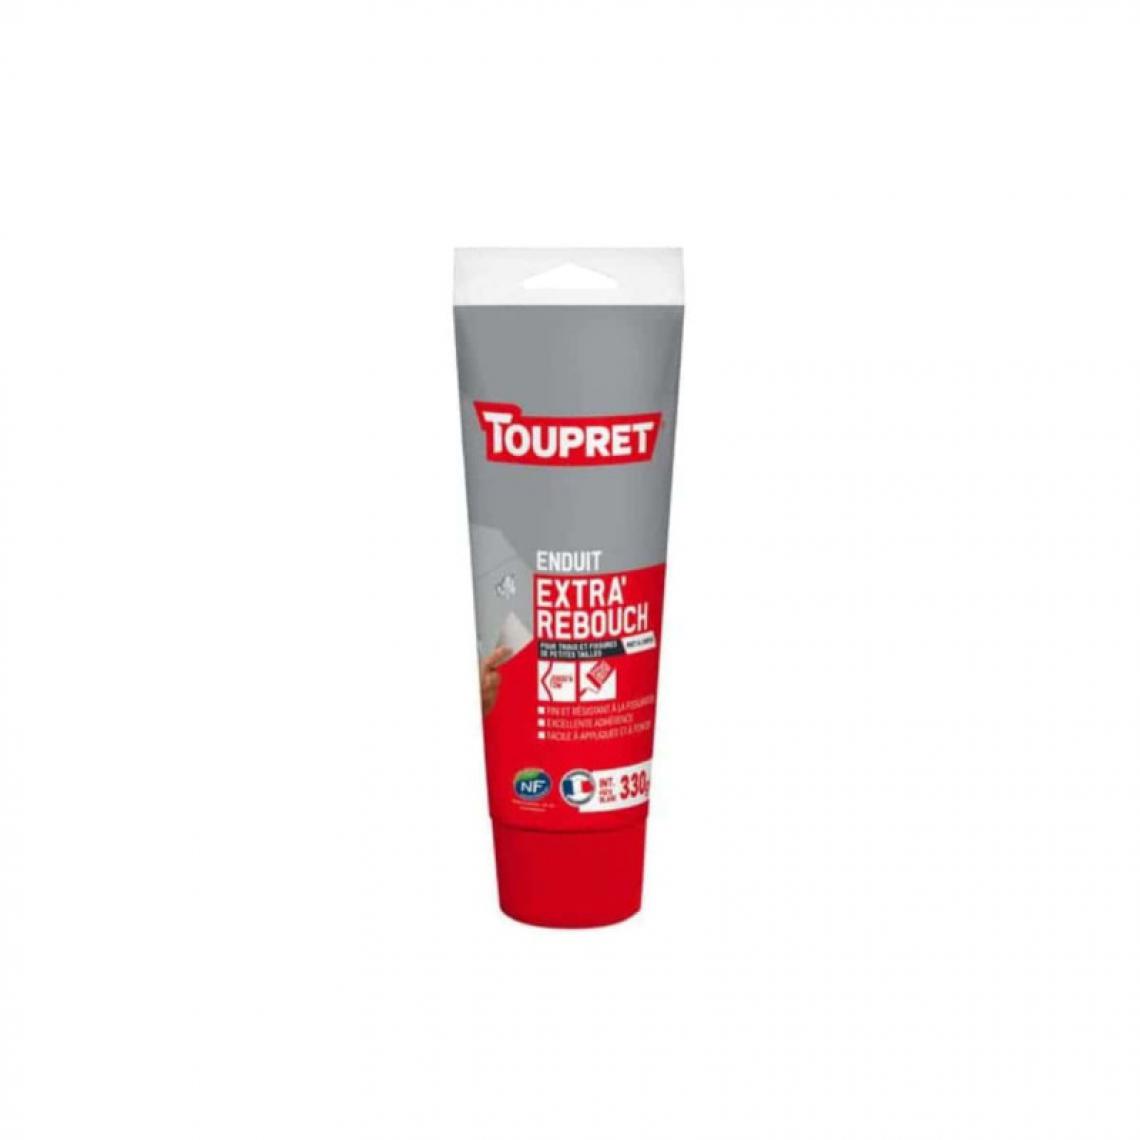 Toupret - Extra Rebouch TOUPRET en Pate 330g - BCRPTUB - Mastic, silicone, joint